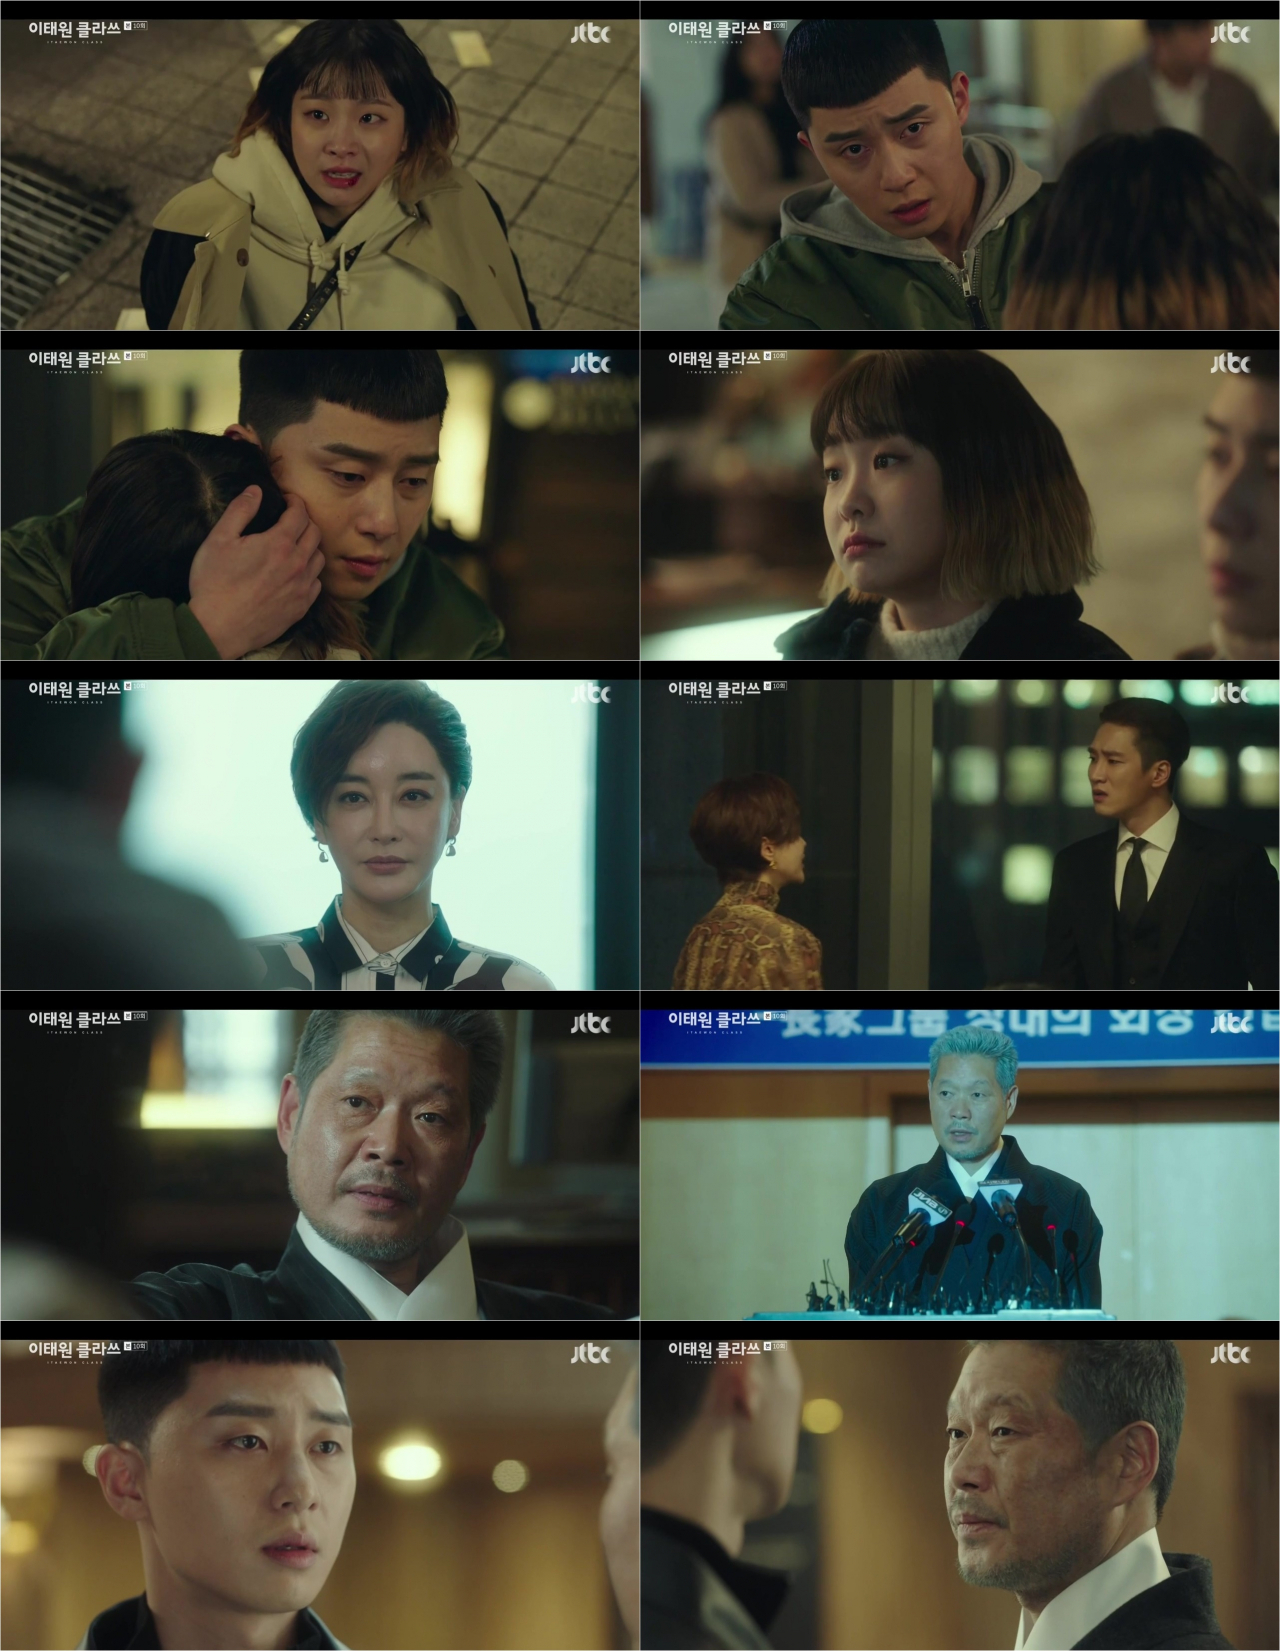 Park Seo-joon, Yoo Jae-myeongs game is not over yet.The audience rating also exceeded 16%, and it changed its own record again and kept the top spot in the same time zone.The 10th JTBC Golden Earth Drama One Klath, which aired on the 29th, recorded 14.8% nationwide and 16.2% in the Seoul metropolitan area (based on Nielsen Korea and paid households), marking its highest ratings for the ninth consecutive time.On the day of the show, the struggles of Park Seo-joon, Joe-yool Lee (Kim Dae-mi), Kang Min-jung (Kim Hye-eun), and Lee Ho-jin (Lee Dae-wit) were drawn to bring down Jang Dae-hee (Yoo Jae-myung).But he had no mercy, either. The unpredictable chairman of the company gave a shocking Reversal story.A midnight chase between Joe-yool Lee and Jang Geun (Ahn Bo-hyun) was held, when Jang Geun One, who confessed to the truth of a hit-and-run accident 10 years ago, tried to destroy the evidence.Roy appeared before the two men who were in a quarrel.Joe-yool Lee was delighted at the idea of helping him with his revenge, but Roy was furious at the deep-seated handprint on her face.In the end, the police were called, and the situation was over and sorry, and Roy was overwhelmed with Joe-yool Lee, and the store was turned upside down with a recording released by Joe-yool Lee.But the fall of the Janga group soon came with Parks chance: he accompanied Joe-yool Lee to a meeting with Kang Min-jung and Lee Ho-jin.Joe-yool Lee planned to use the current situation of the Janga group as a reverse to develop a plurality of editions; her cool judgment and outspoken behavior moved the minds of the two.Even Oh Byung-hun (Yoon Kyung-ho) revealed the truth and preoccupied the high ground in the revenge battle, but the next step was to Chang, who was the question of whether he was going to defeat Son Jang-geun One.The criticism and criticism of Jang Geun One were uncontrollably intense, and the public opinion in the Jangga group as well as the public who heard the news was hot.Oh Soo-ah (Kwon Na-ra), who was trusted by Chairman Chang, advised, I think Jang Geun One should be dismissed.But he tried to keep Jang Geun One, raising his voice as I am the Jangga itself.Kang Min-jung, who was in charge of Changs secretary, assumed that the waiting timing had come, and immediately aimed at Changs position, assuming the dismissal of the CEO.The hearts of two sons, Jang Geun One and Jang Geun-soo (Kim Dong-hee), who watch the crisis of Jang Ga-ui, the chief of the food service industry, and his father, who was stronger than anyone else, were also uncomfortable.But Chang did not show any signs of shaking.In the end, Chang kept his place firmly.Kang Min-jung, who had all the plans, was ordered to go down to the governor of Pajin, and Jang Geun One, who had no power or measures, was sentenced to seven years in prison.Only Roy was left. Everyone fell to hell, but his heart was hotter.At the end of the broadcast, the confrontation between the two men again was still sharp and fierce. This Jang Dae-hee made you an enemy.In Changs declaration of war, I promise the same thing with all my promises, Parks pledge to keep you from being left alone, signaled an unfinished rebellion.Roy, who is still swallowing the bitterness of life, wonders when he will taste the sweetness of revenge.